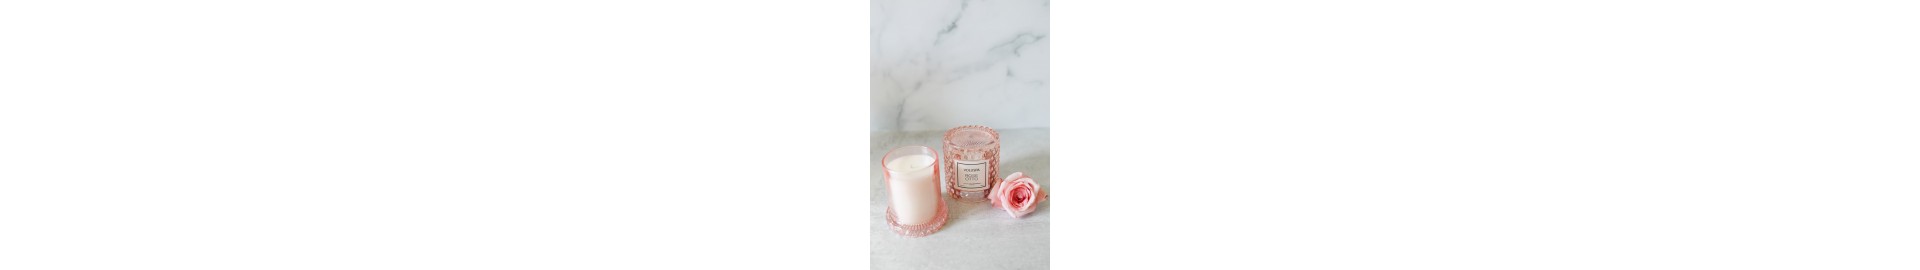 BOUGIES . BOUGIE, CANDLE, CANDLES, VOLUSPA